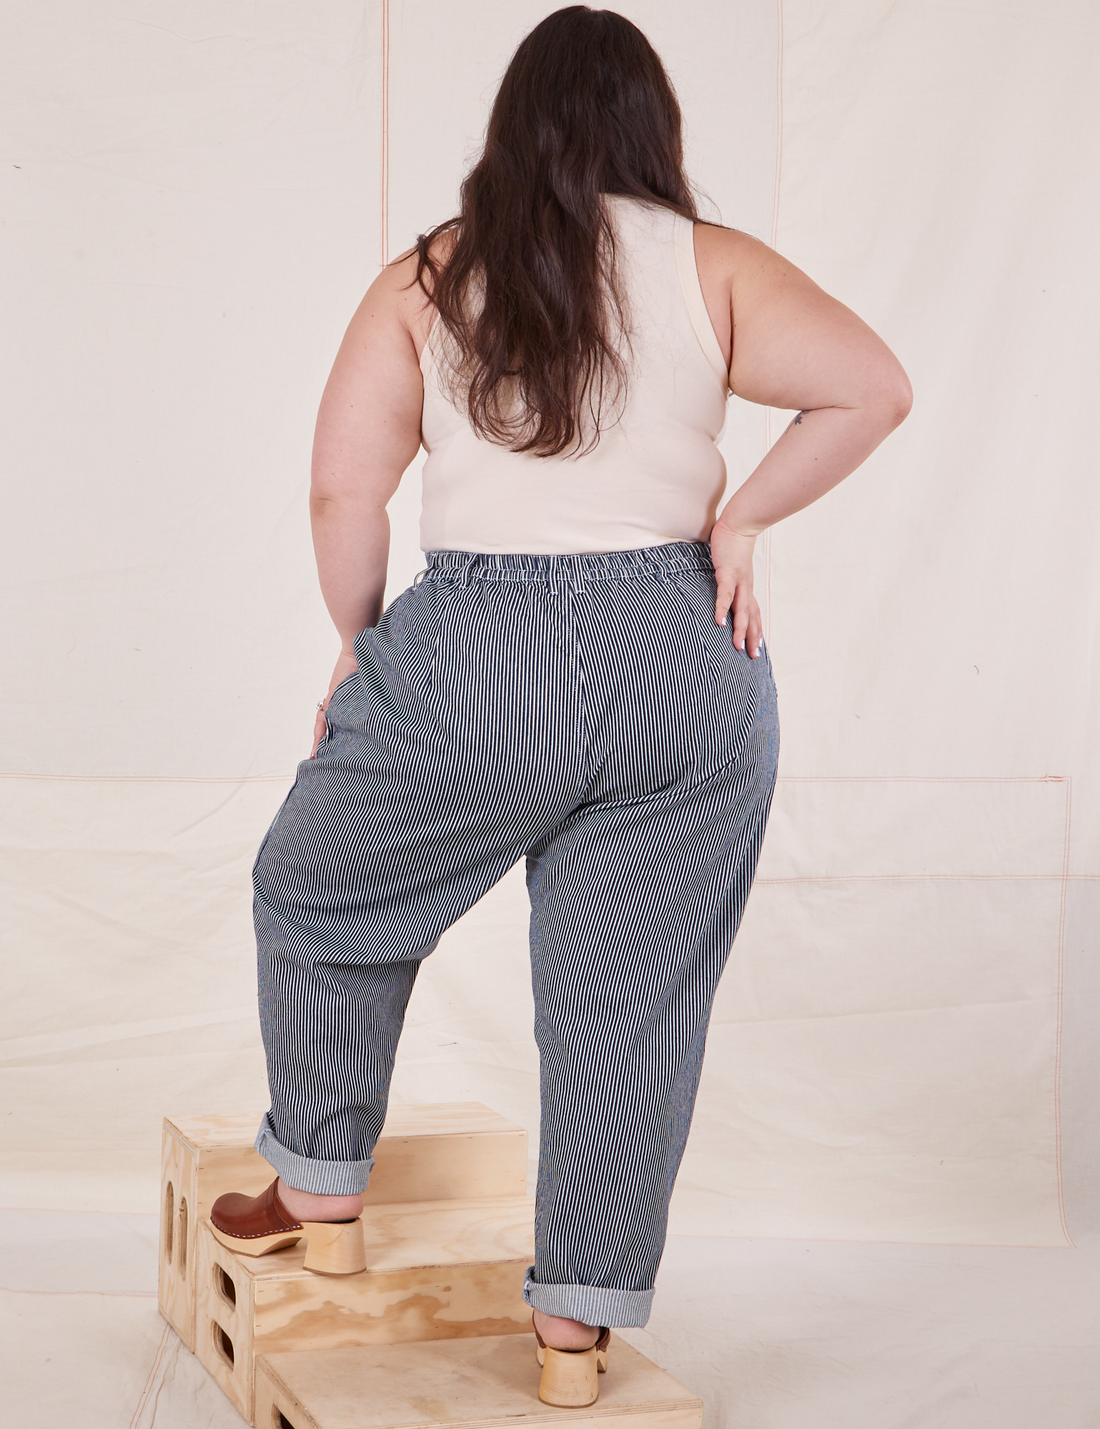 Back view of Denim Trouser Jeans in Railroad Stripe and vintage off-white Tank Top worn by Ashley